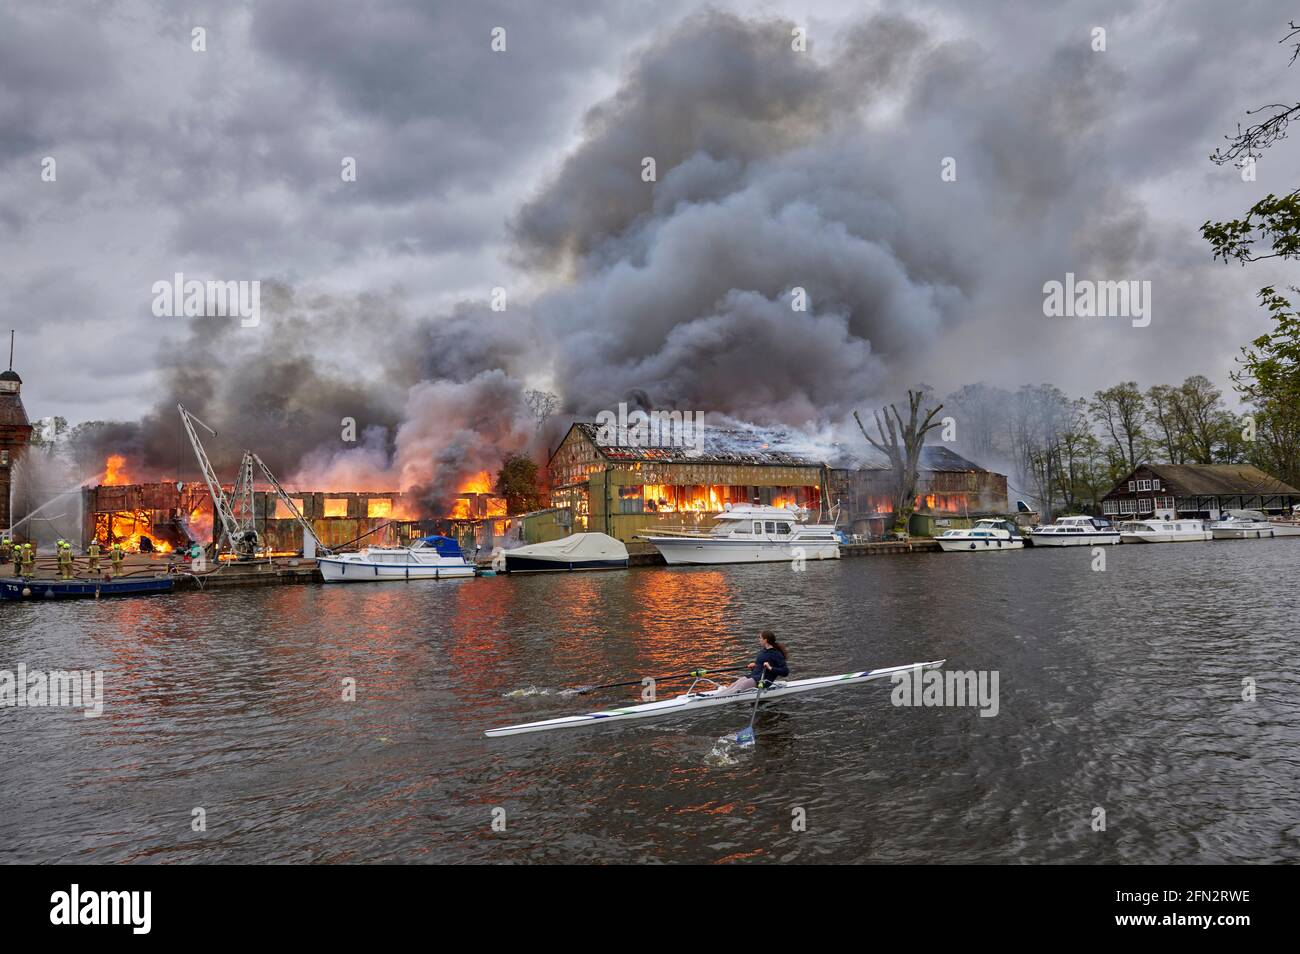 Rower from Wimbledon High School passing the Platt's Eyot fire of 3 May 2021 which destroyed the boat shed of Otter Marine and the Dunkirk evacuation Stock Photo